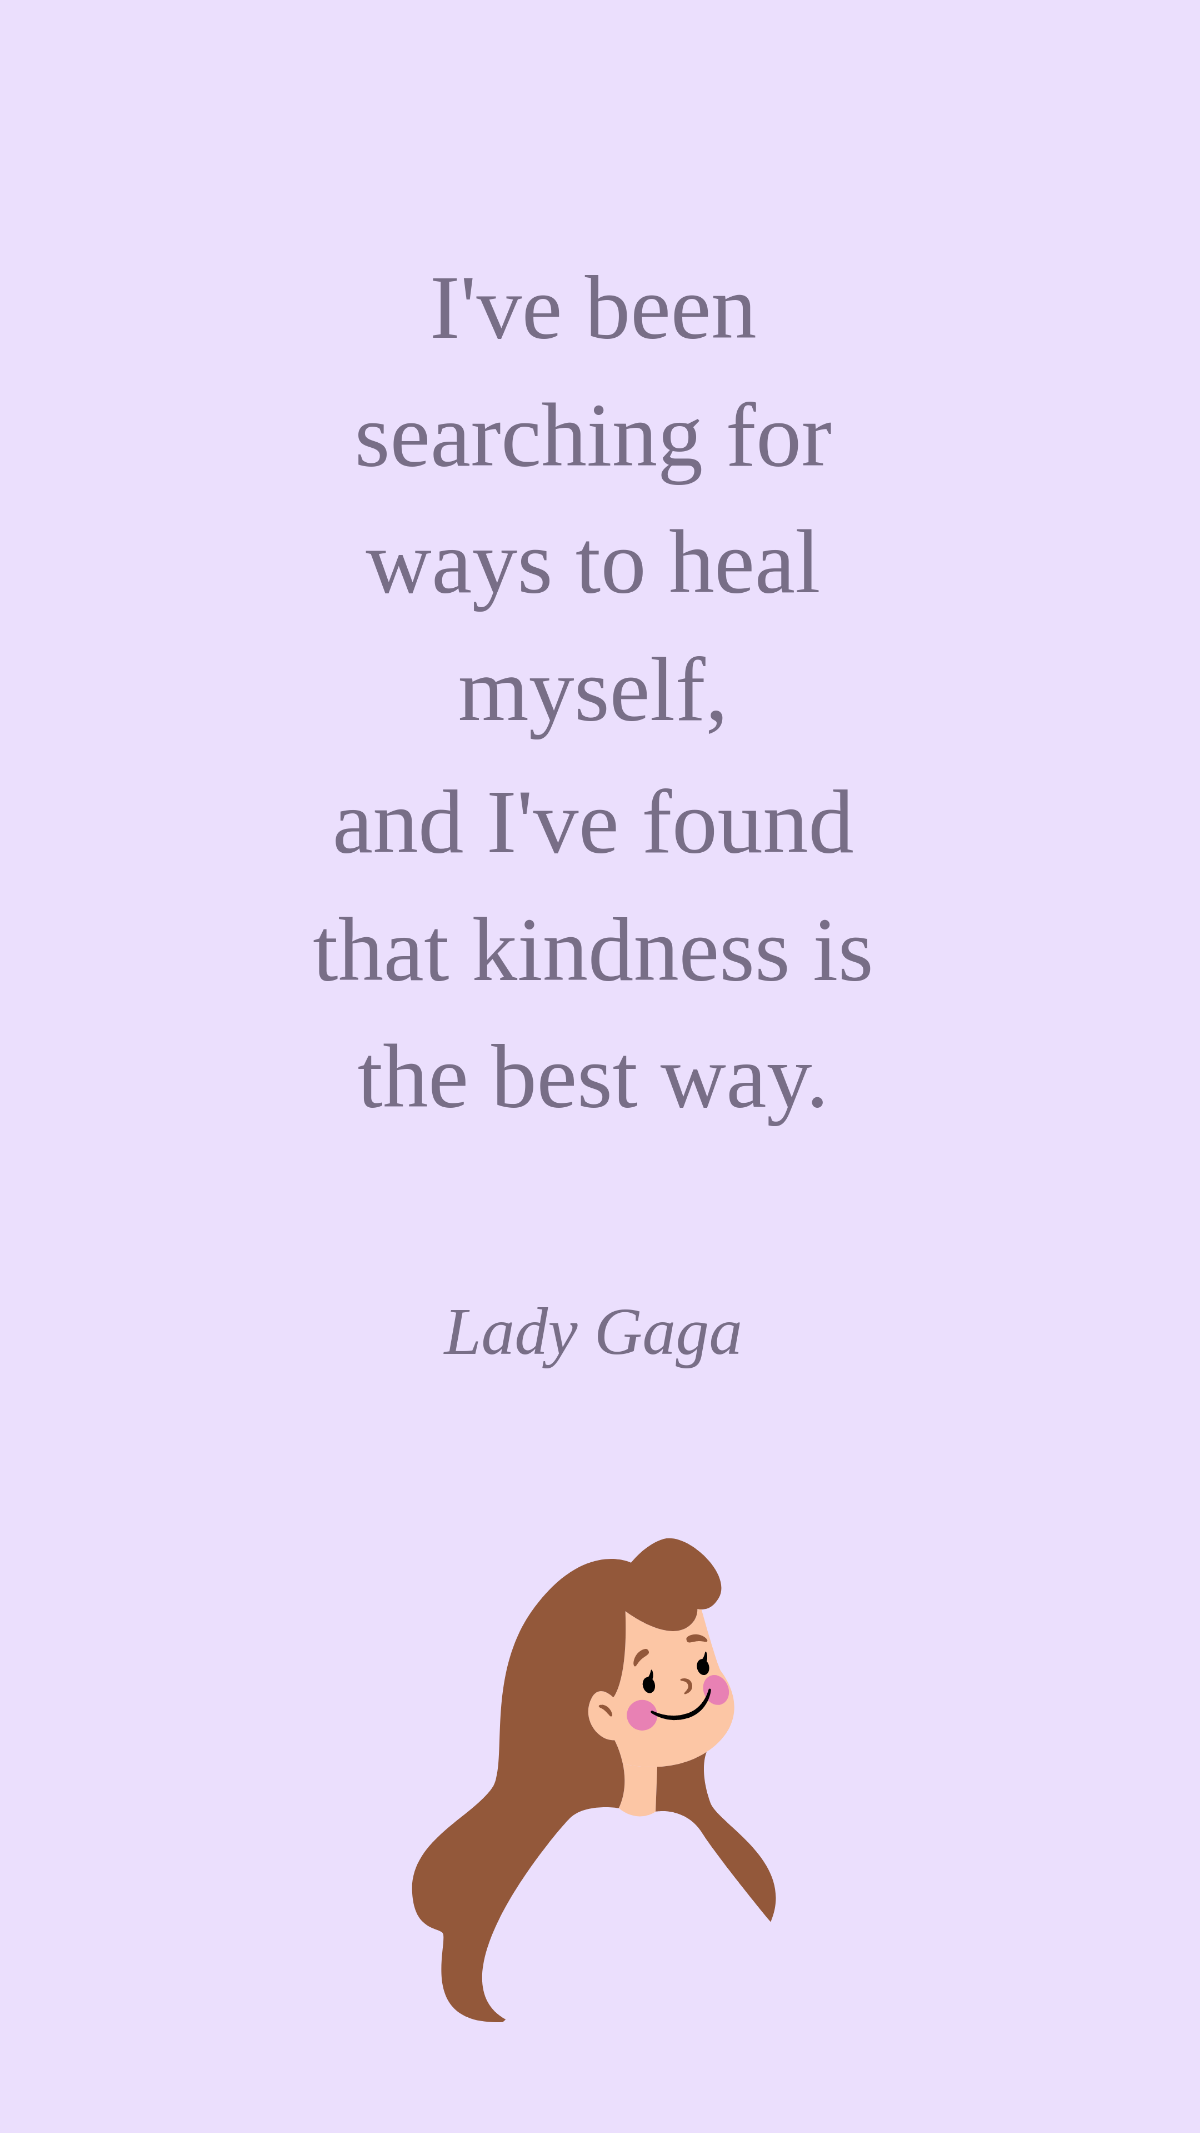 Lady Gaga - I've been searching for ways to heal myself, and I've found that kindness is the best way. Template